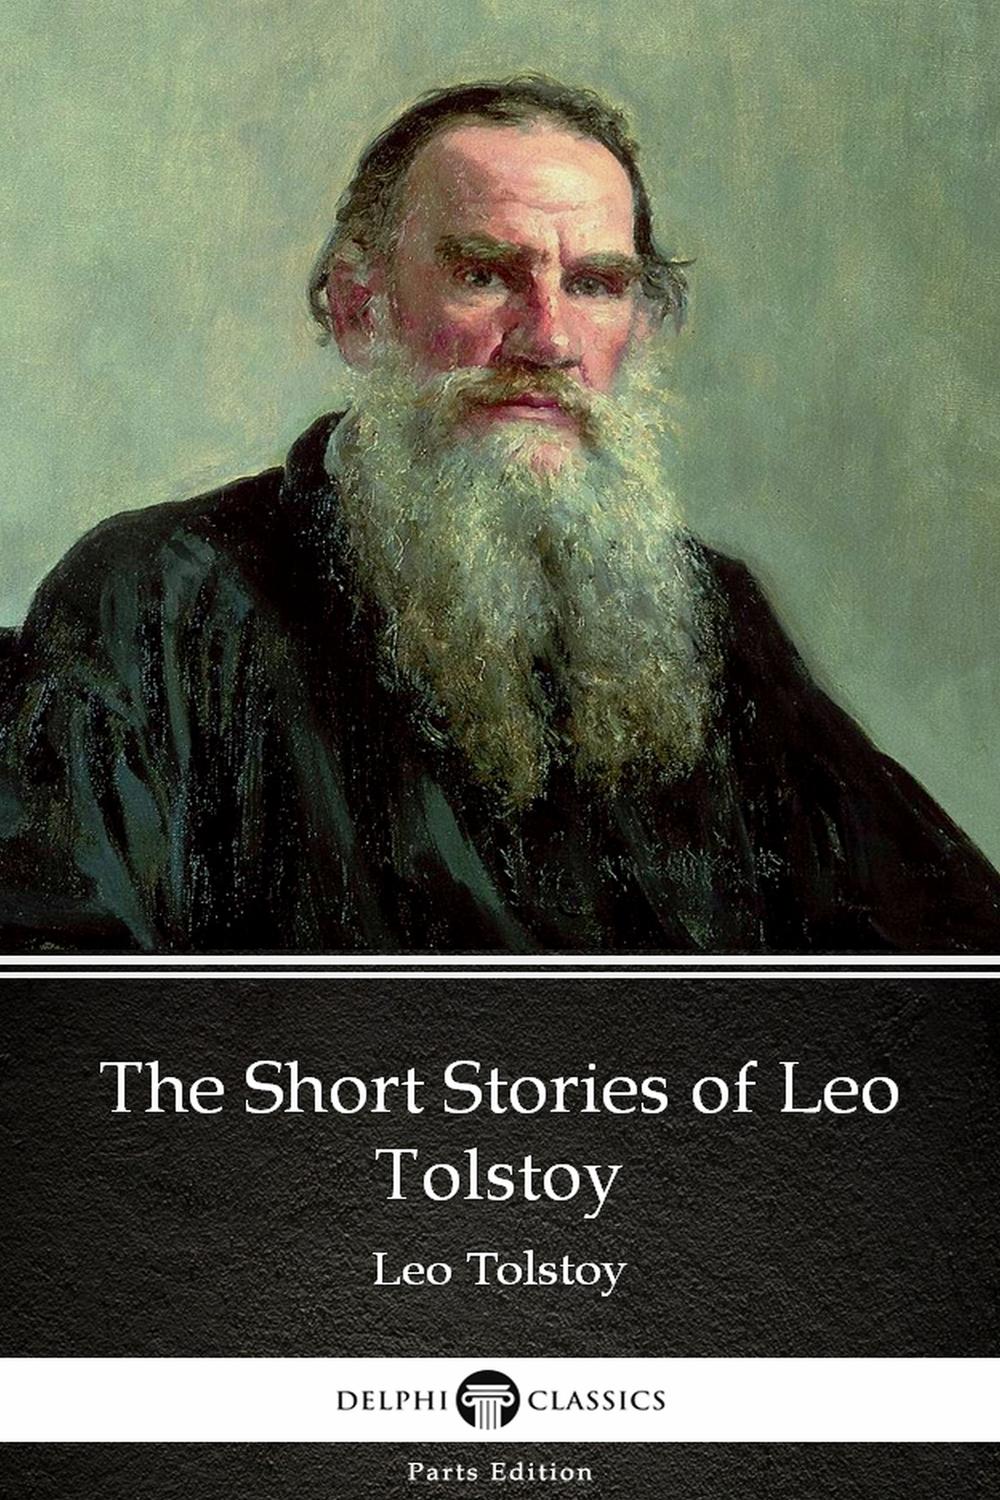 The Short Stories of Leo Tolstoy by Leo Tolstoy (Illustrated) - Leo Tolstoy